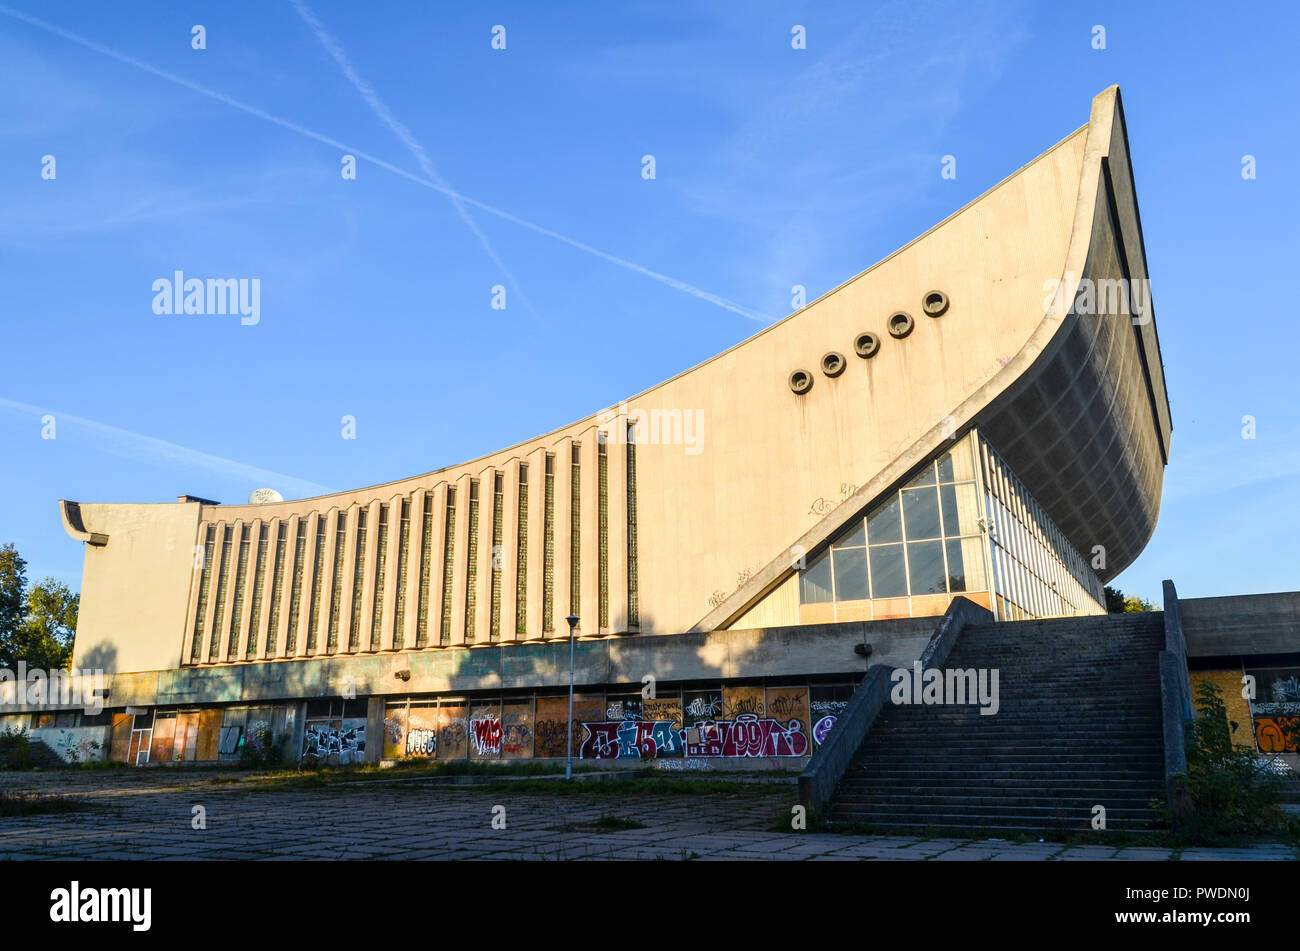 Vilnius Palace of Concerts and Sports, a large disused building by the Neris river Stock Photo